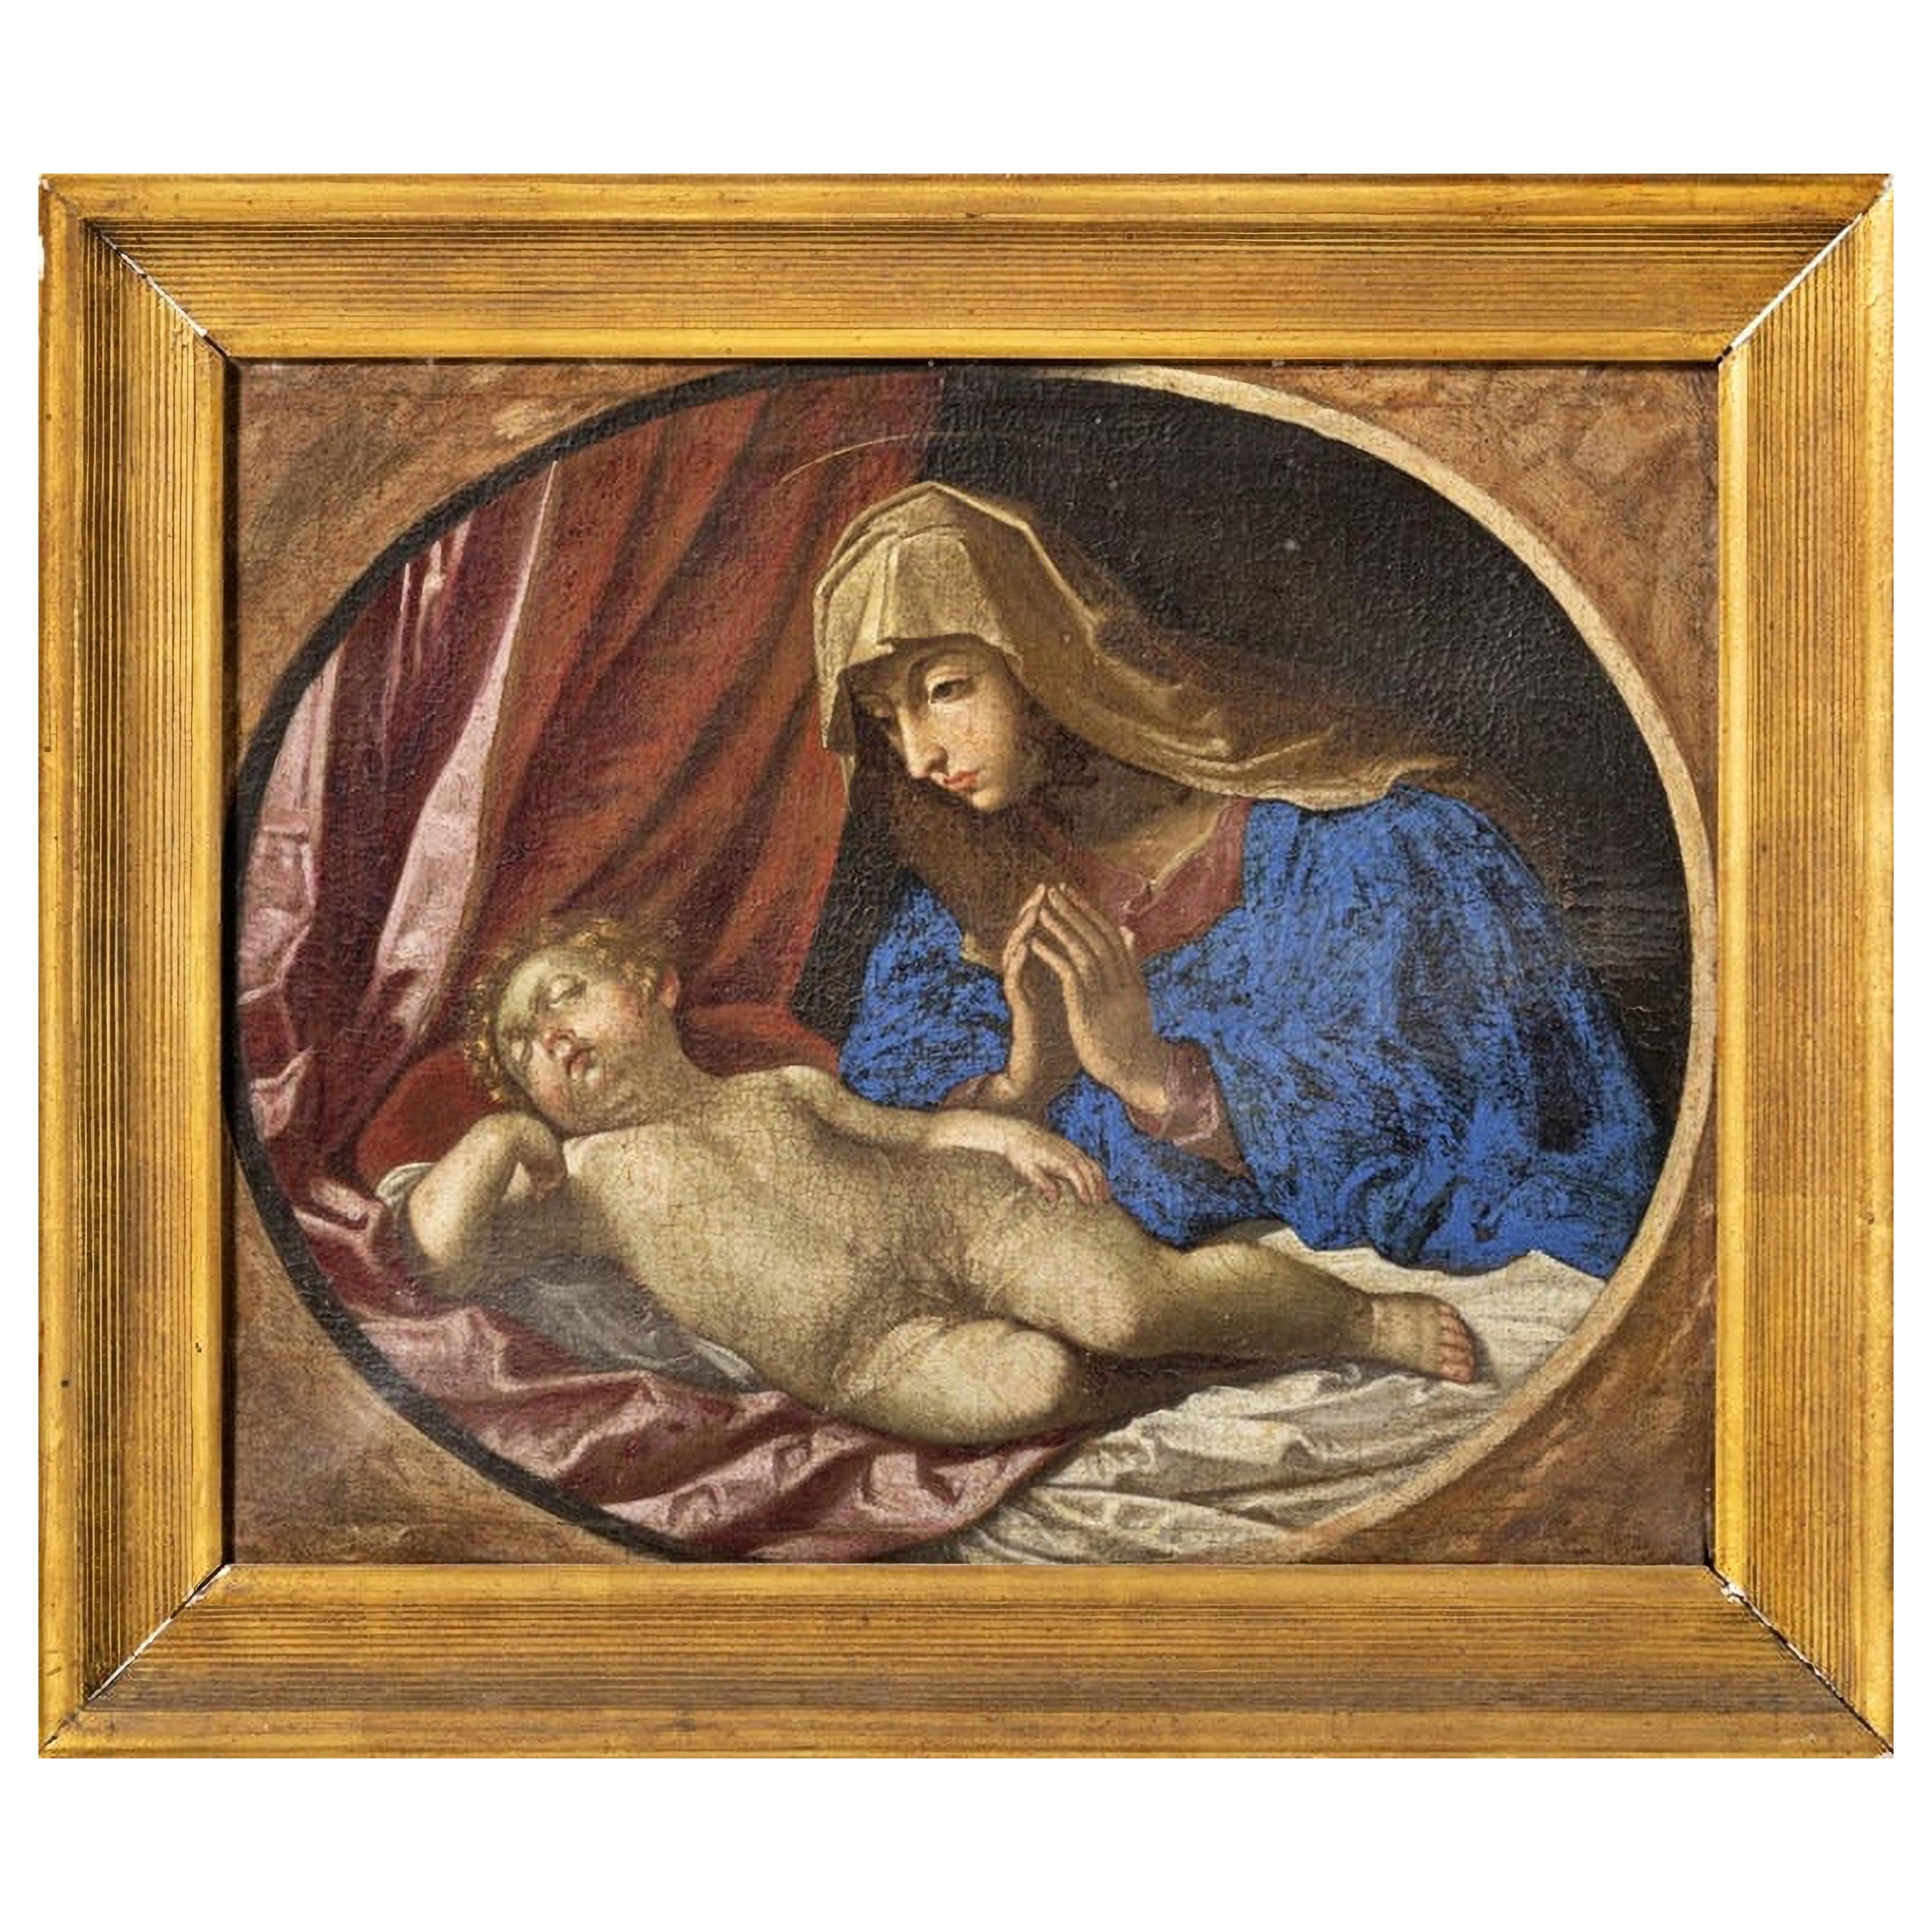 Our Lady with the Child Jesus 18th Century Italian School For Sale